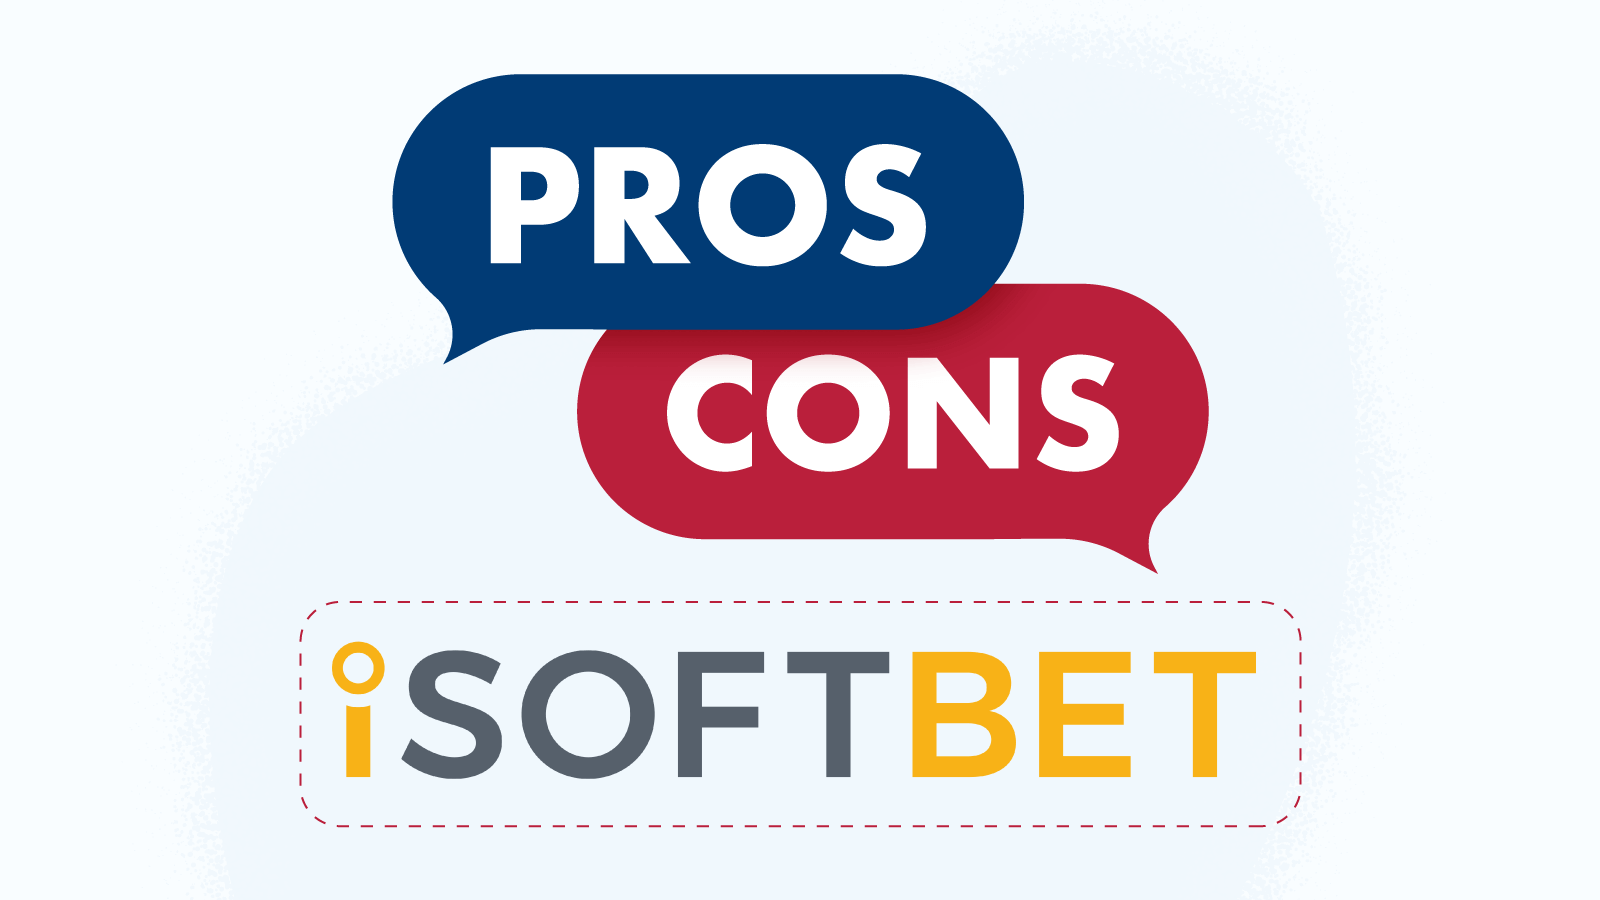 iSoftBet Pros and Cons